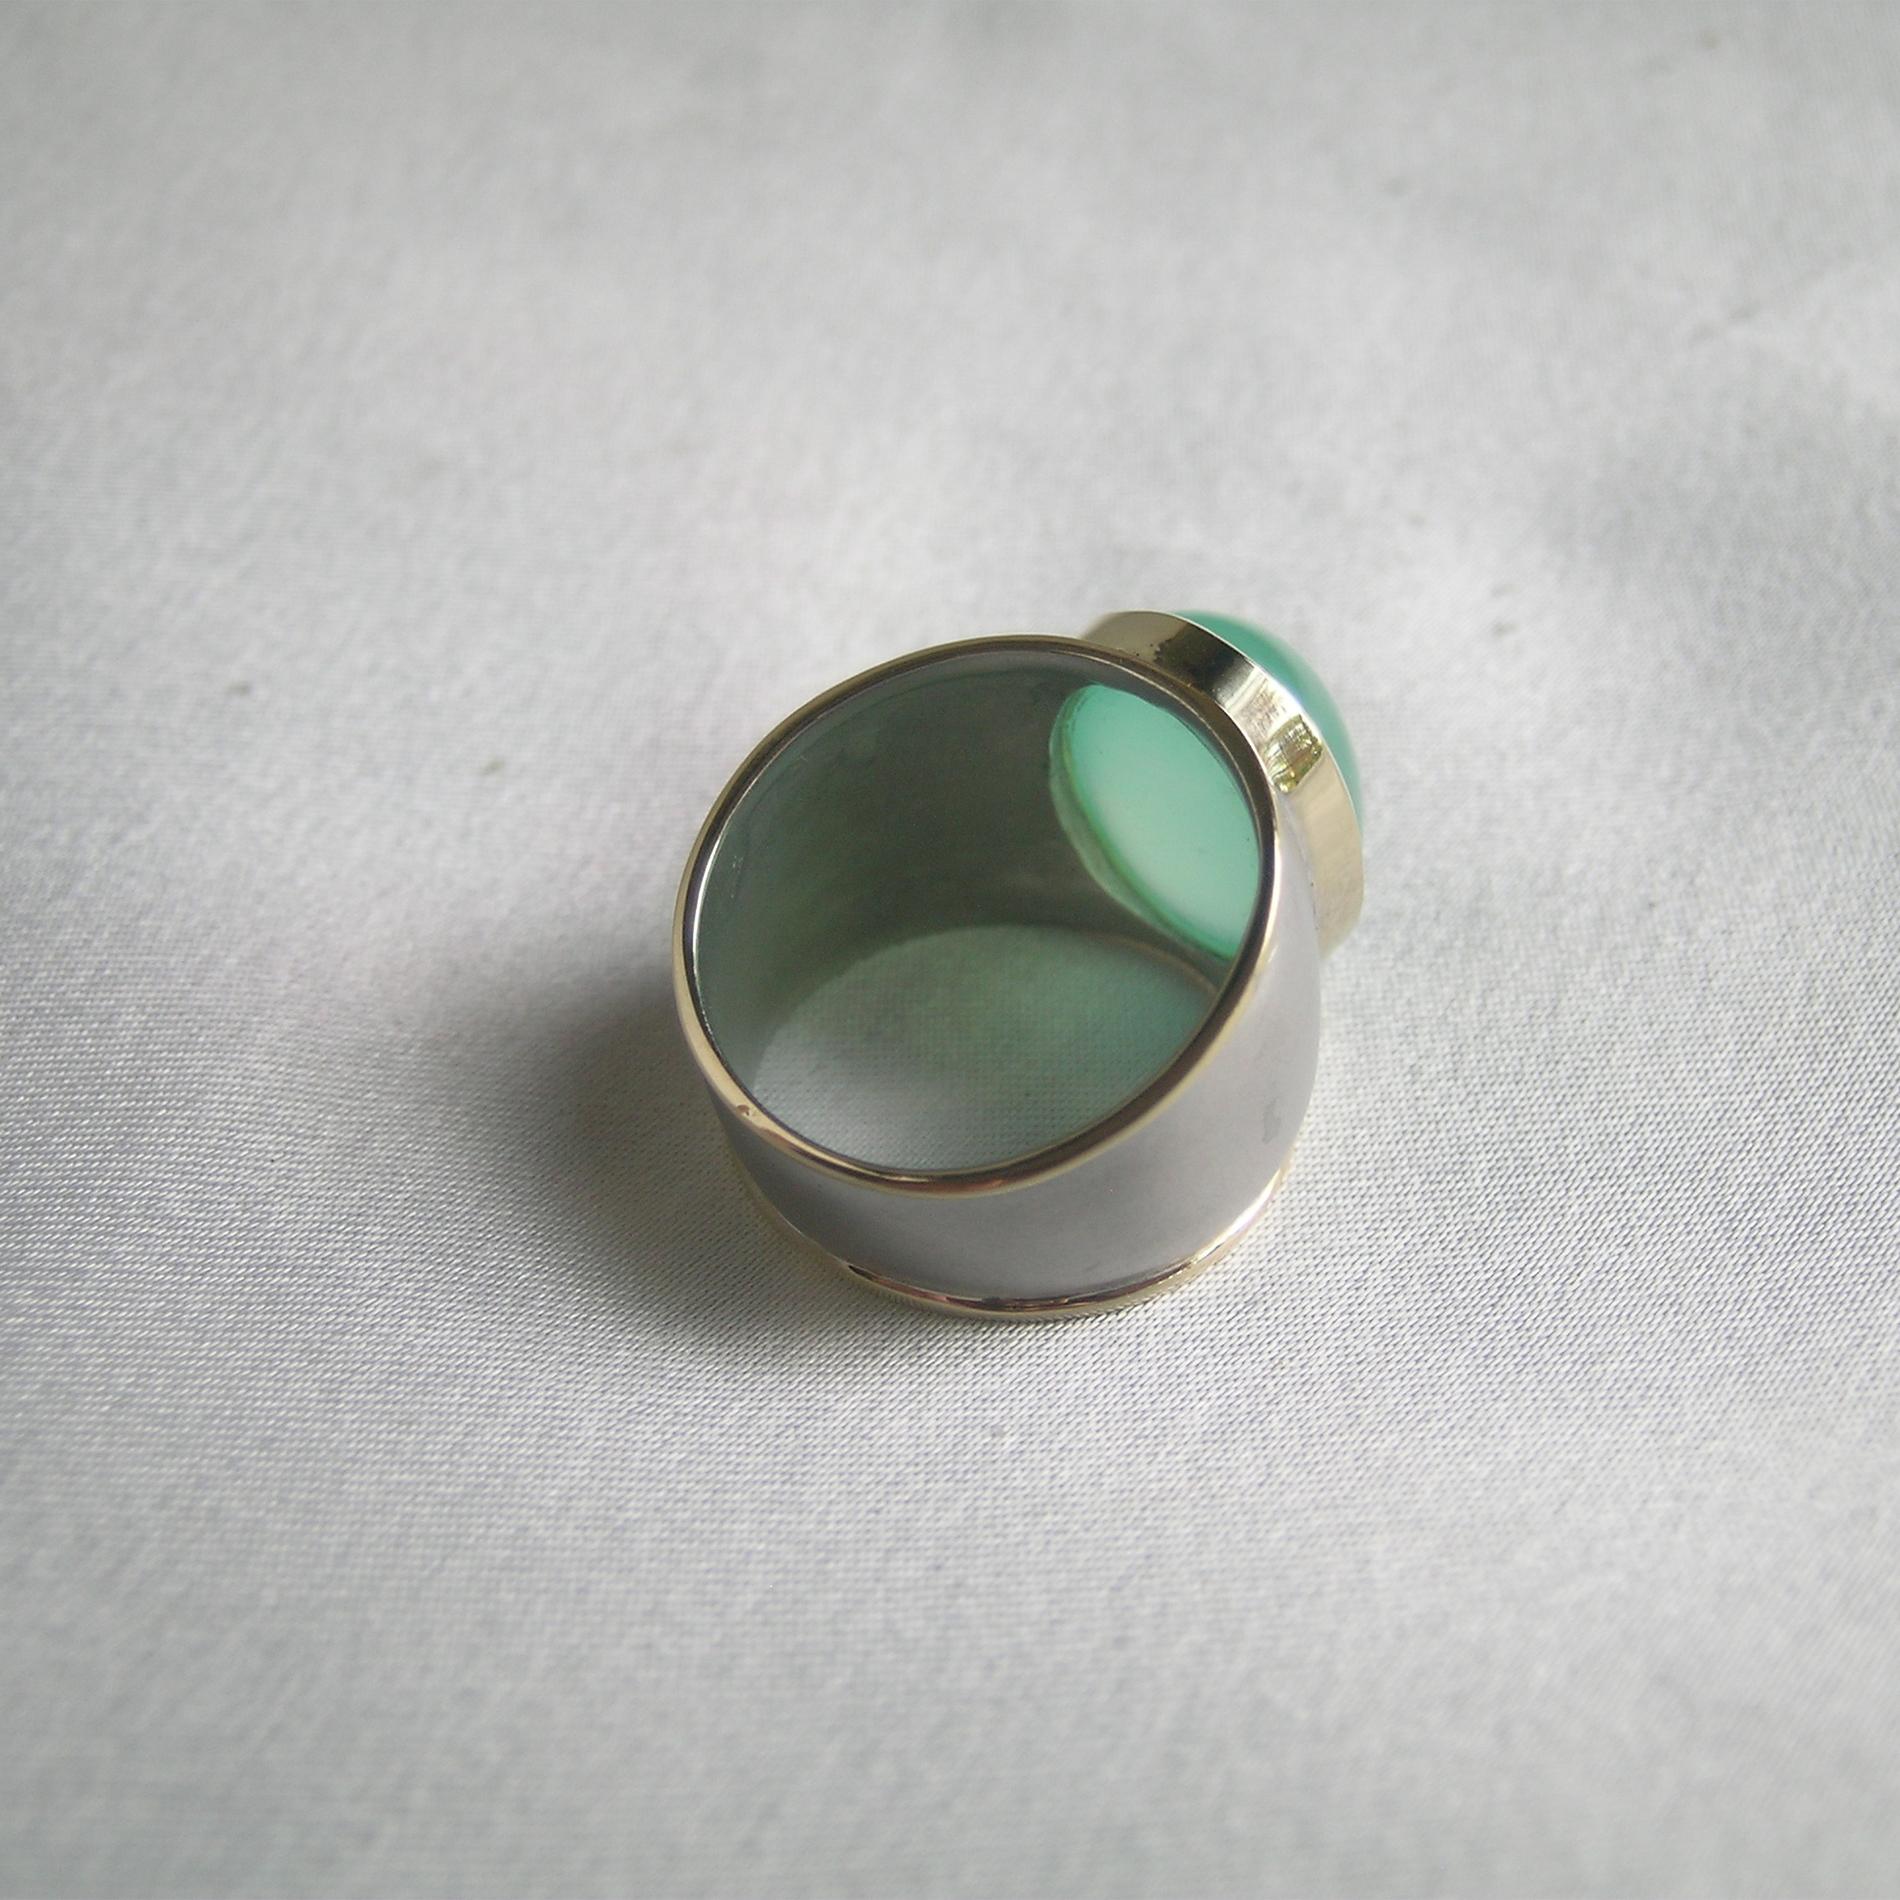 is chrysoprase expensive